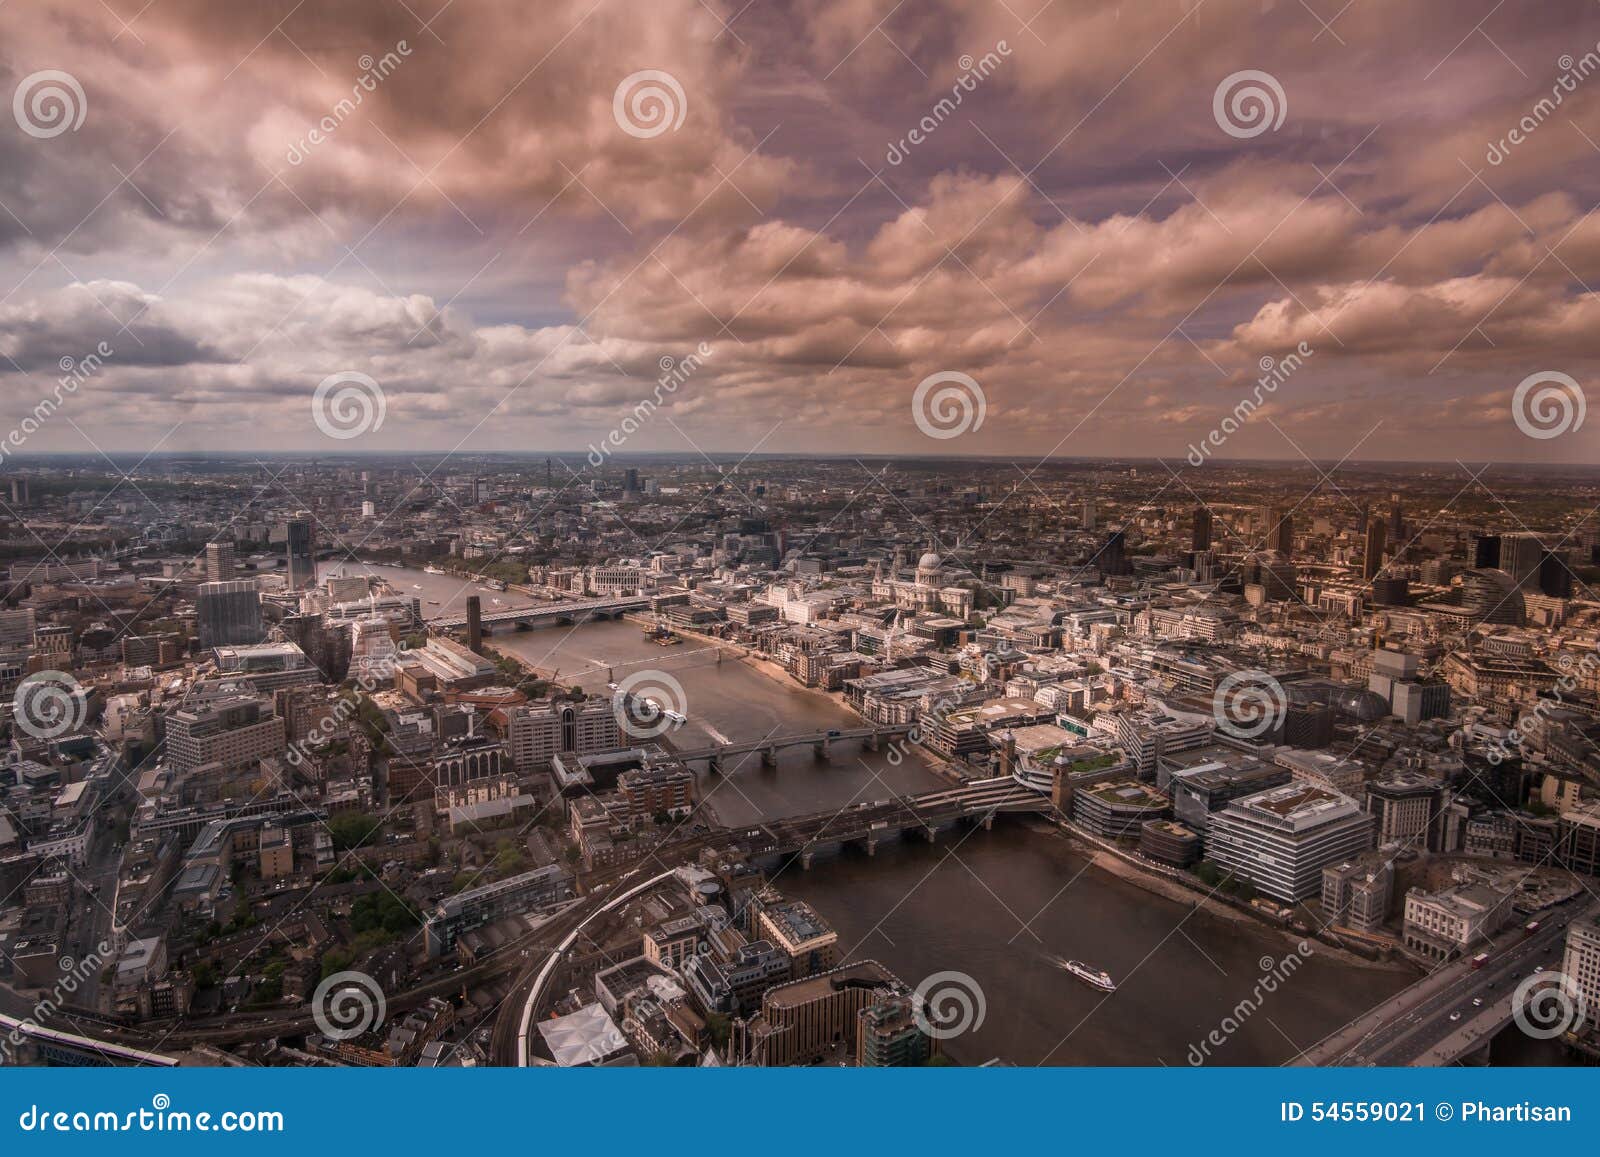 river thames and central london,england facing